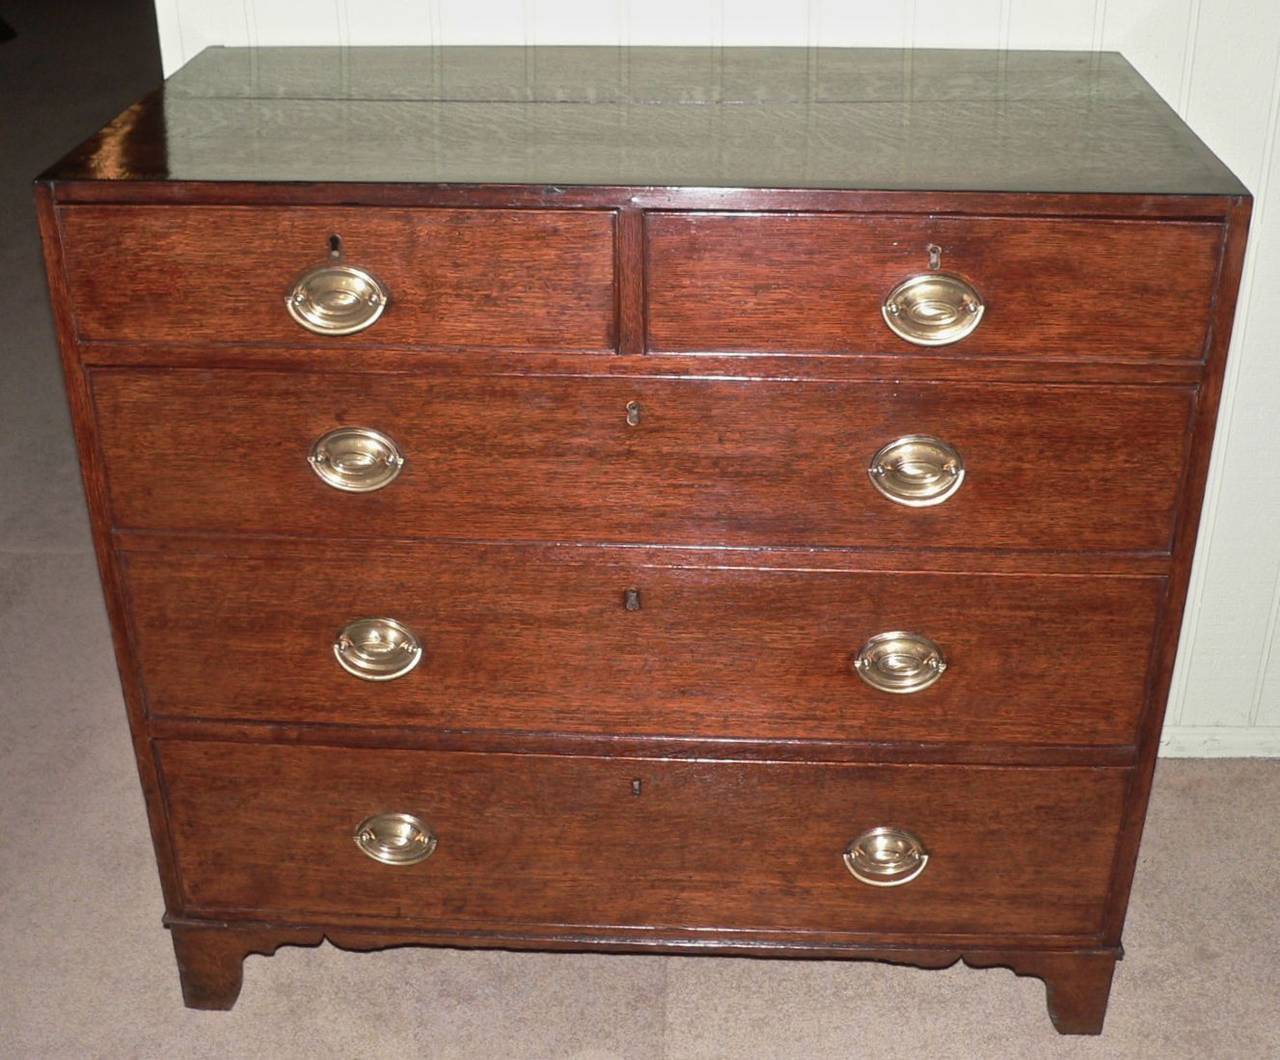 Made from quarter saw oak with the top crossbanded in mahogany, this chest is a very clean and tidy example dating from circa 1835. It has its original brass Hepplewhite oval handles along with unrestored original bracket feet.
The top is mark free